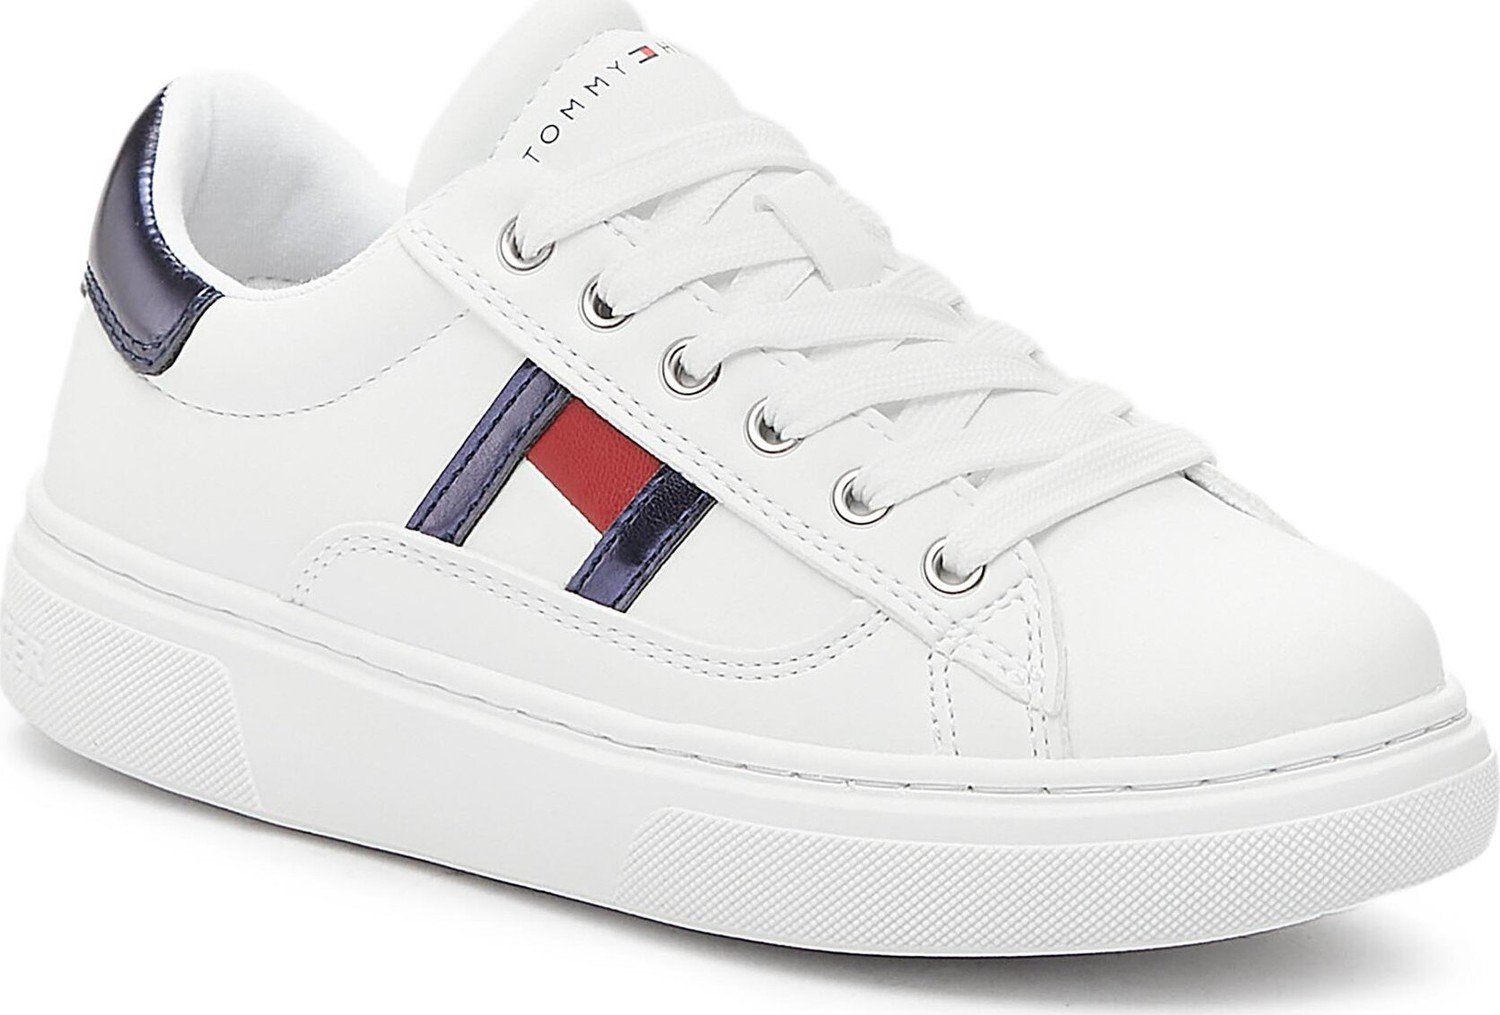 Sneakersy Tommy Hilfiger T3A9-32966-1355A473 M Off White/Blue A473